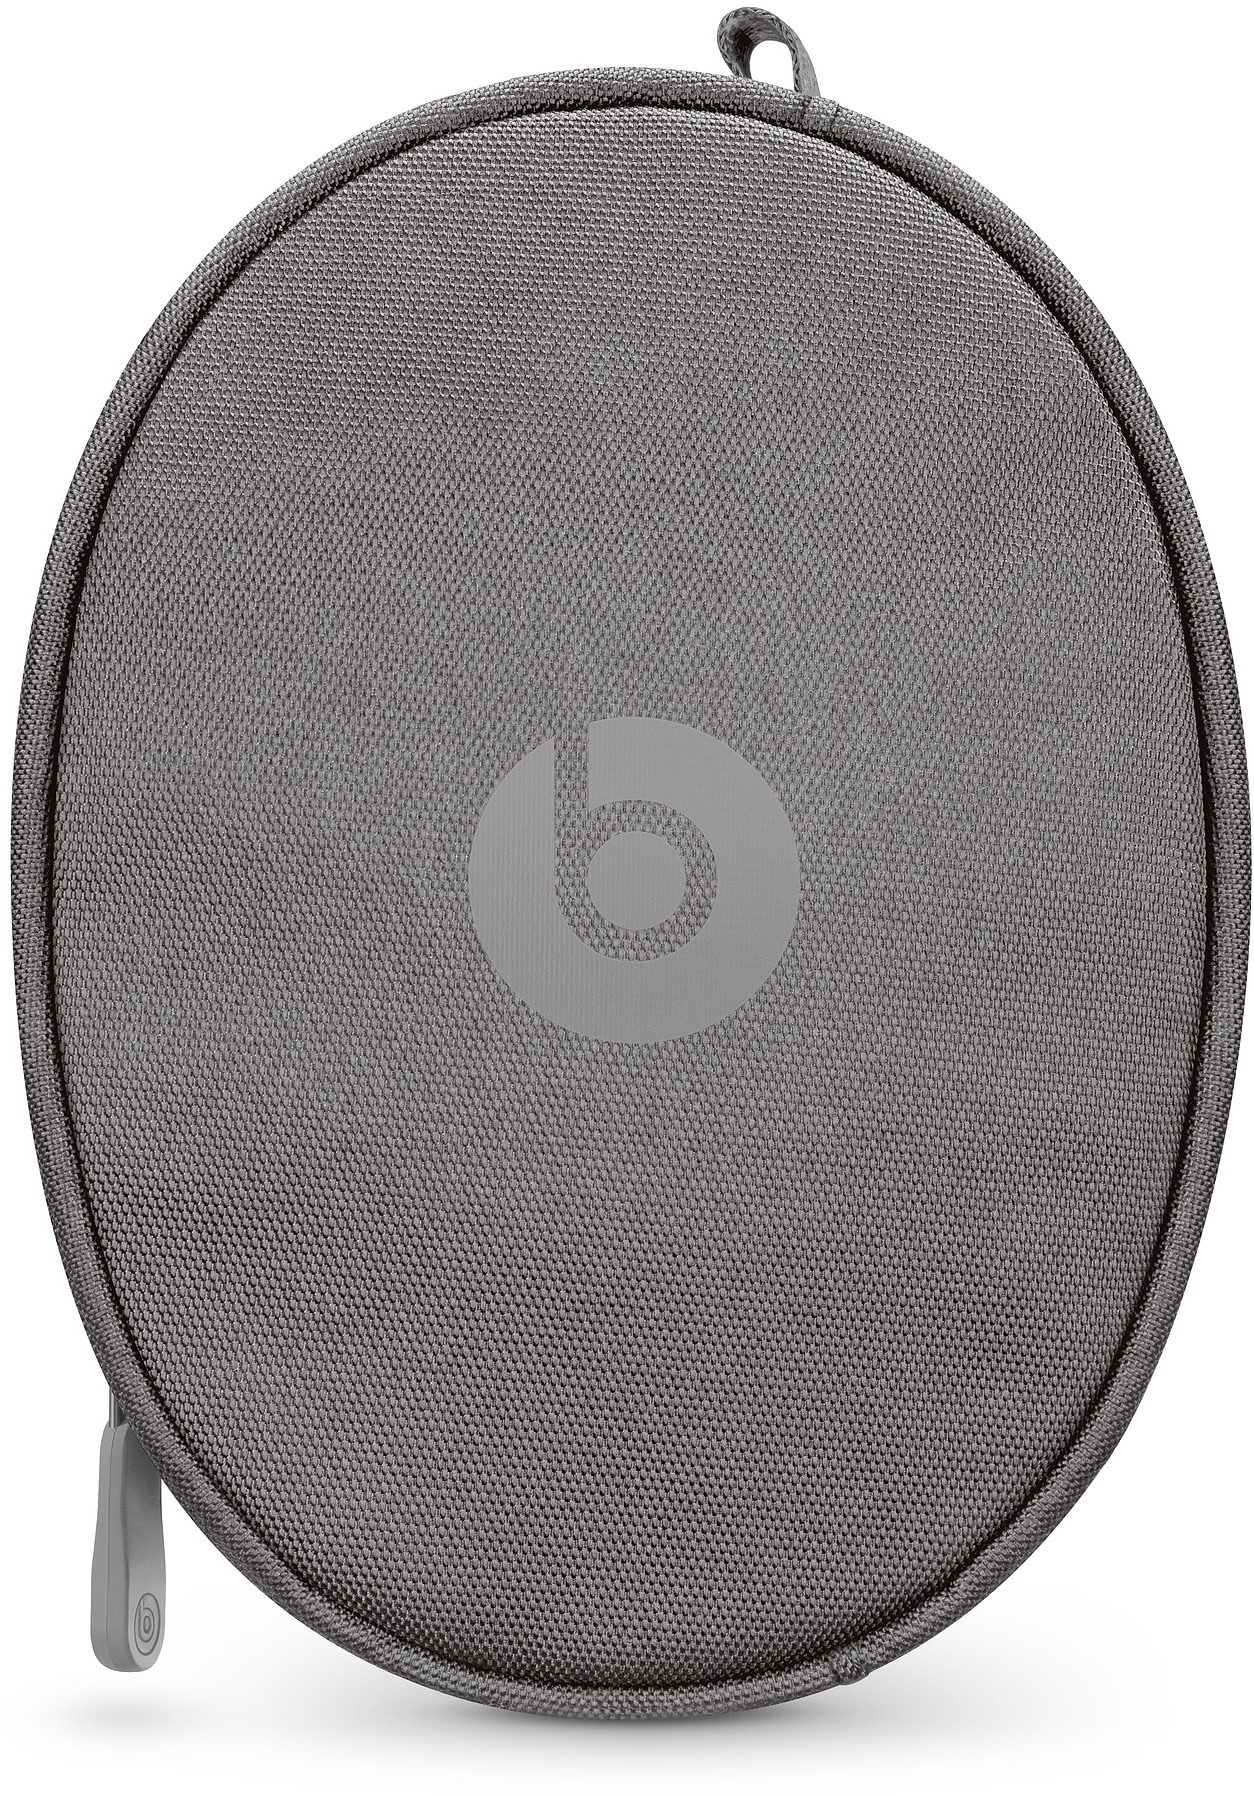 Beats Solo3 Wireless - New Year's Edition